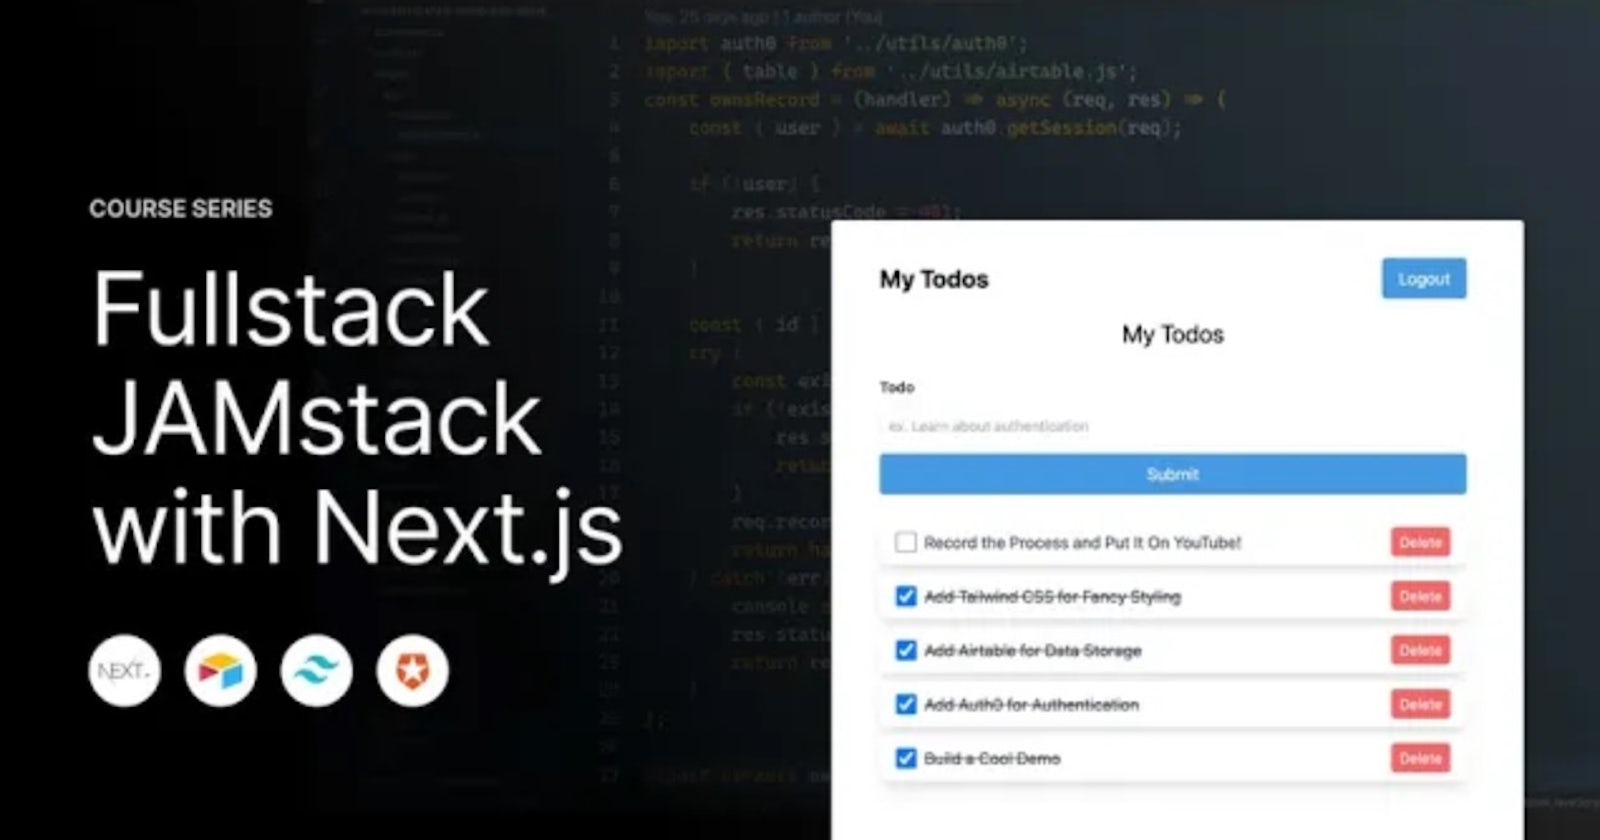 Build an Authenticated JAMstack App with Next.js, Airtable, Tailwind CSS, and Auth0